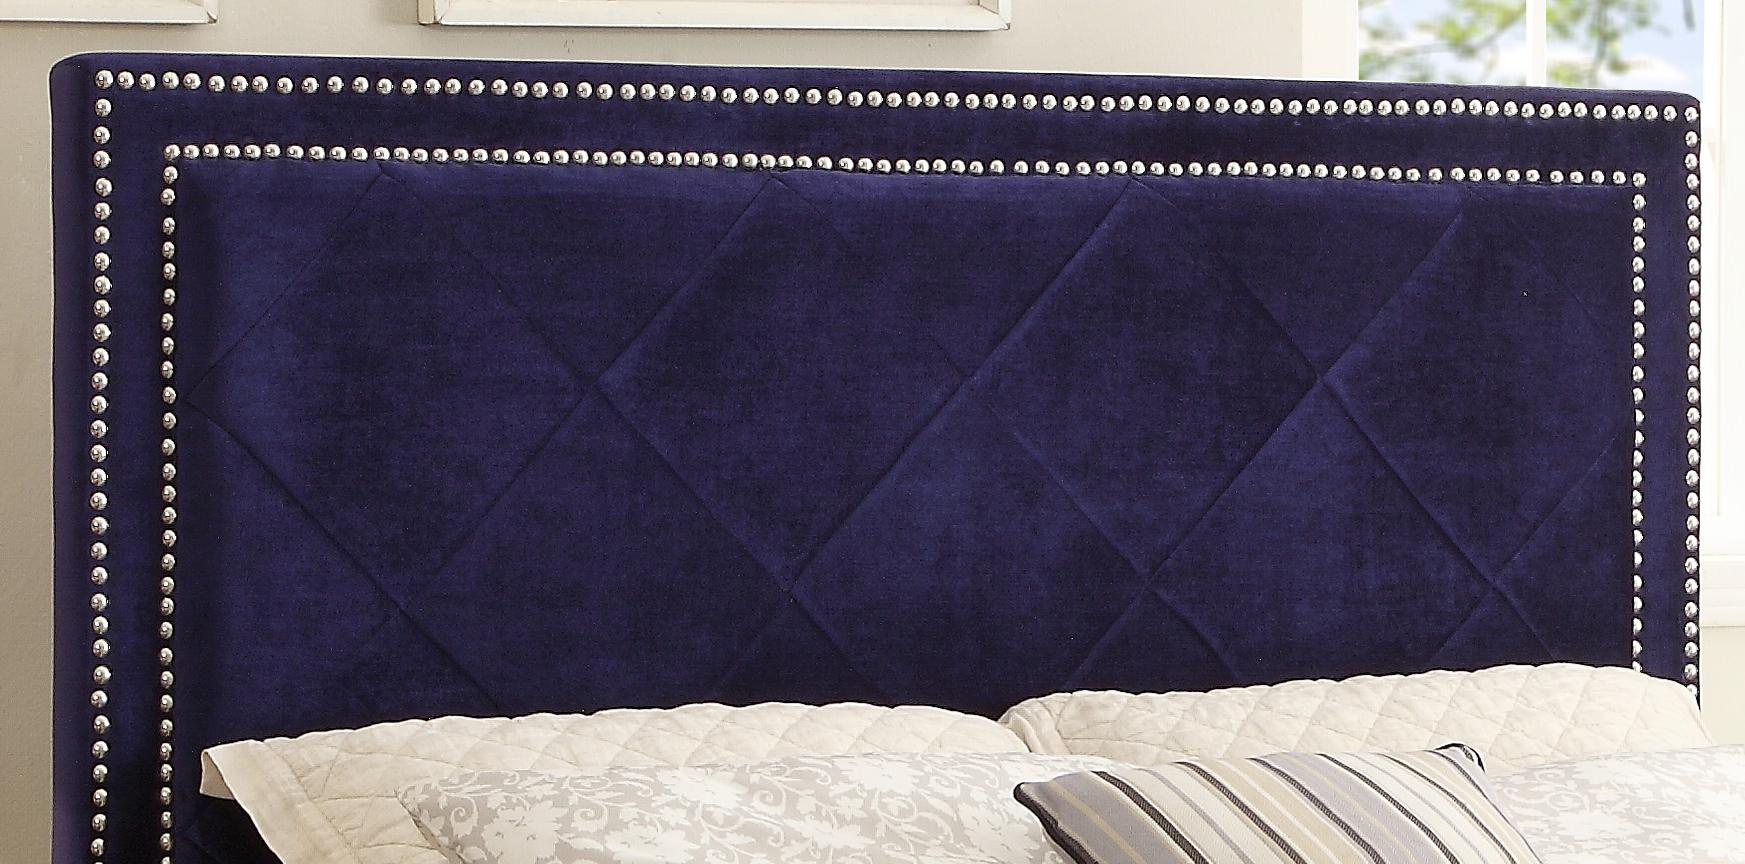 

    
Meridian Hampton Queen Size Bed in Navy Chrome Nailheads Contemporary Style
